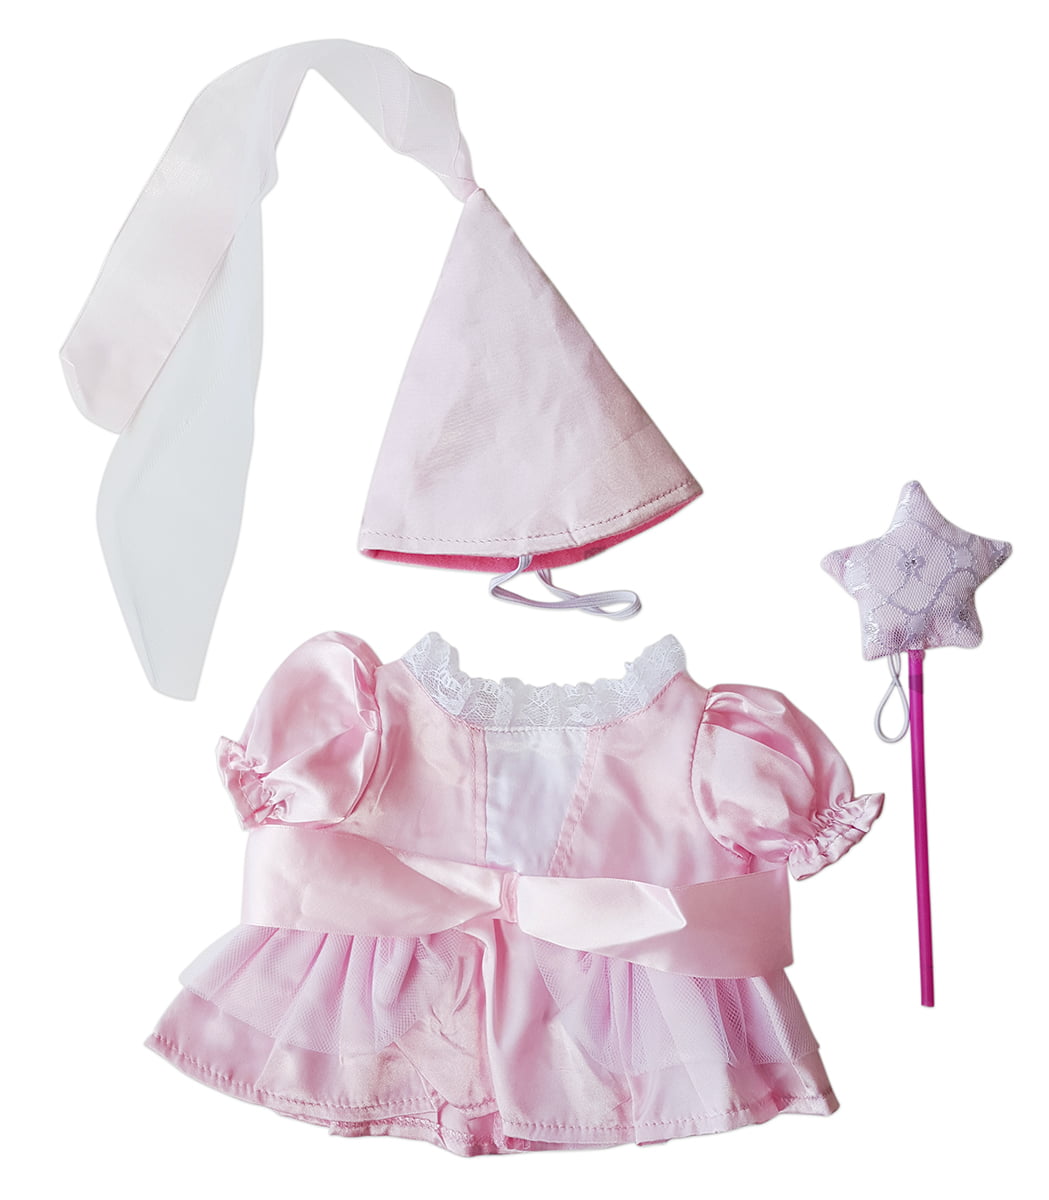 Summer Fun Set Outfit Fits Most 14" 18" Build-a-bear and Make Your Own Stuffed 